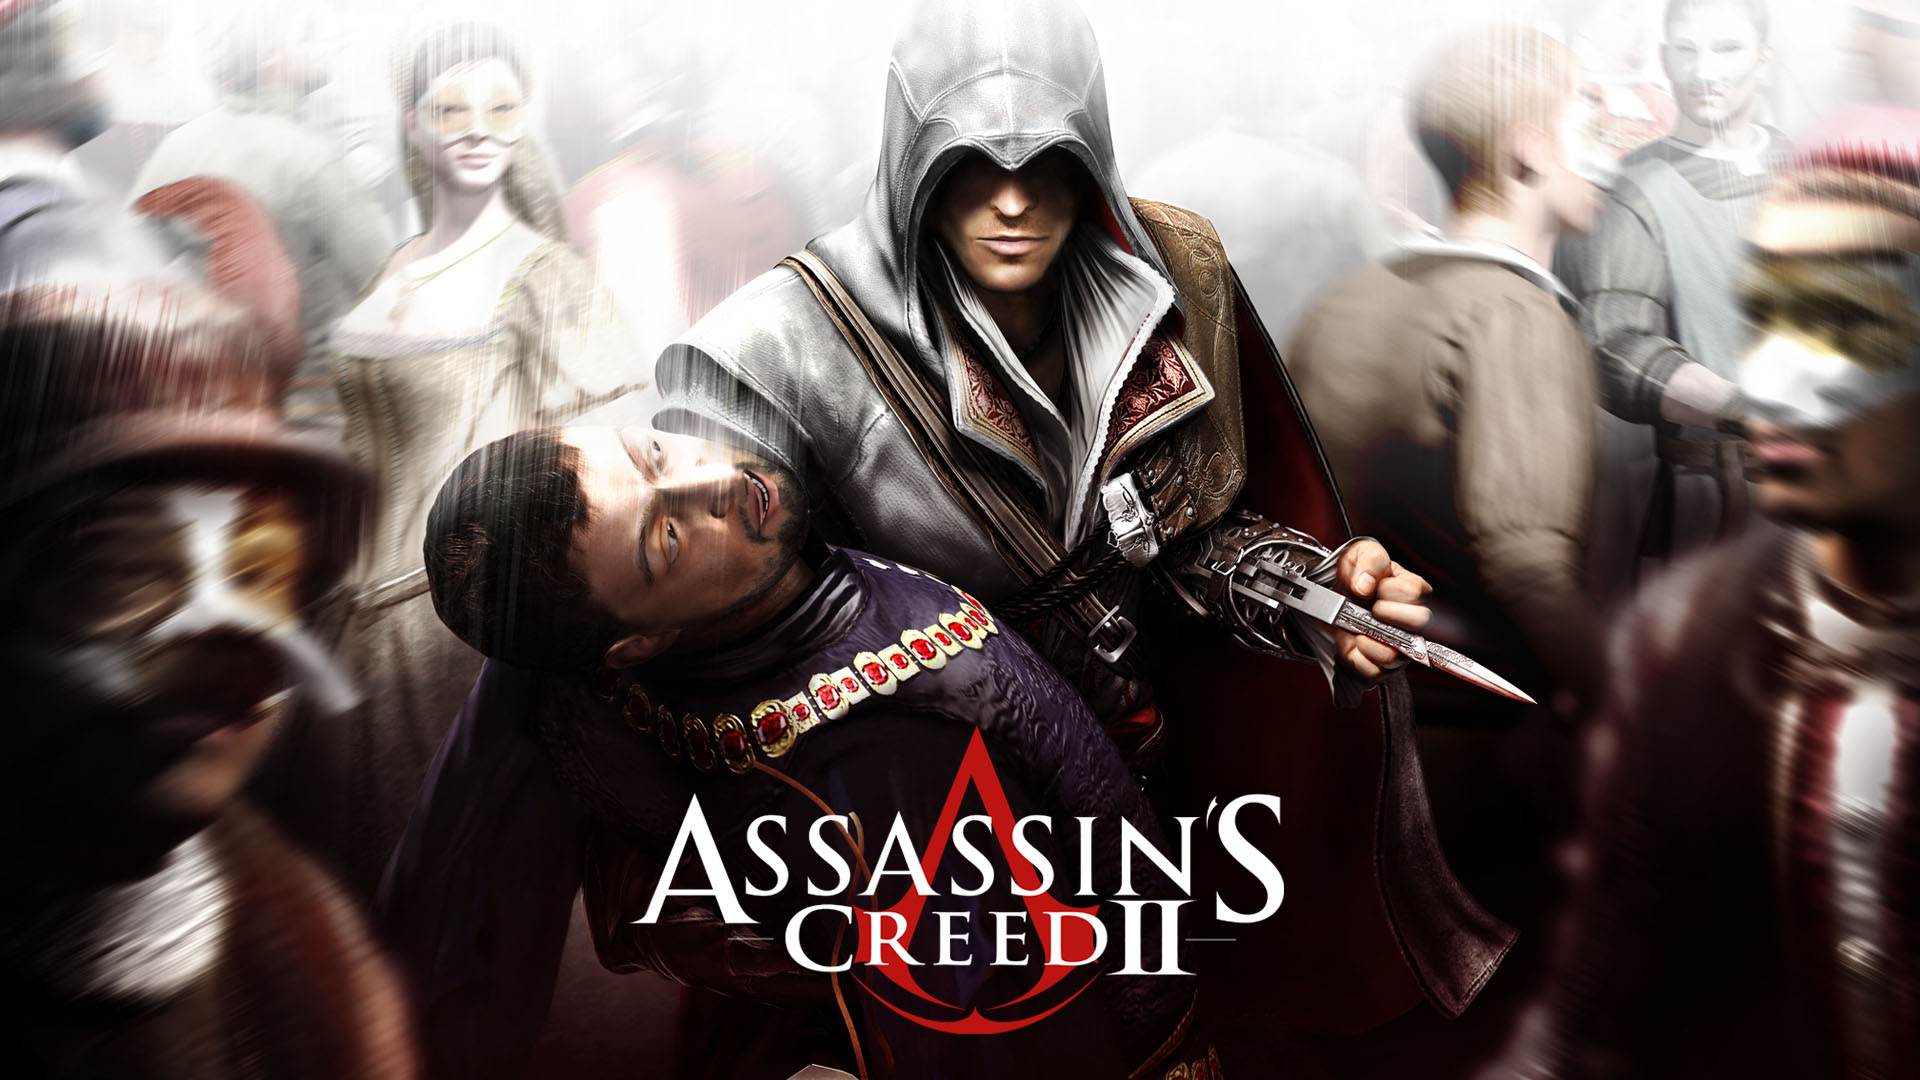 assassins creed 2 free download full version with crack